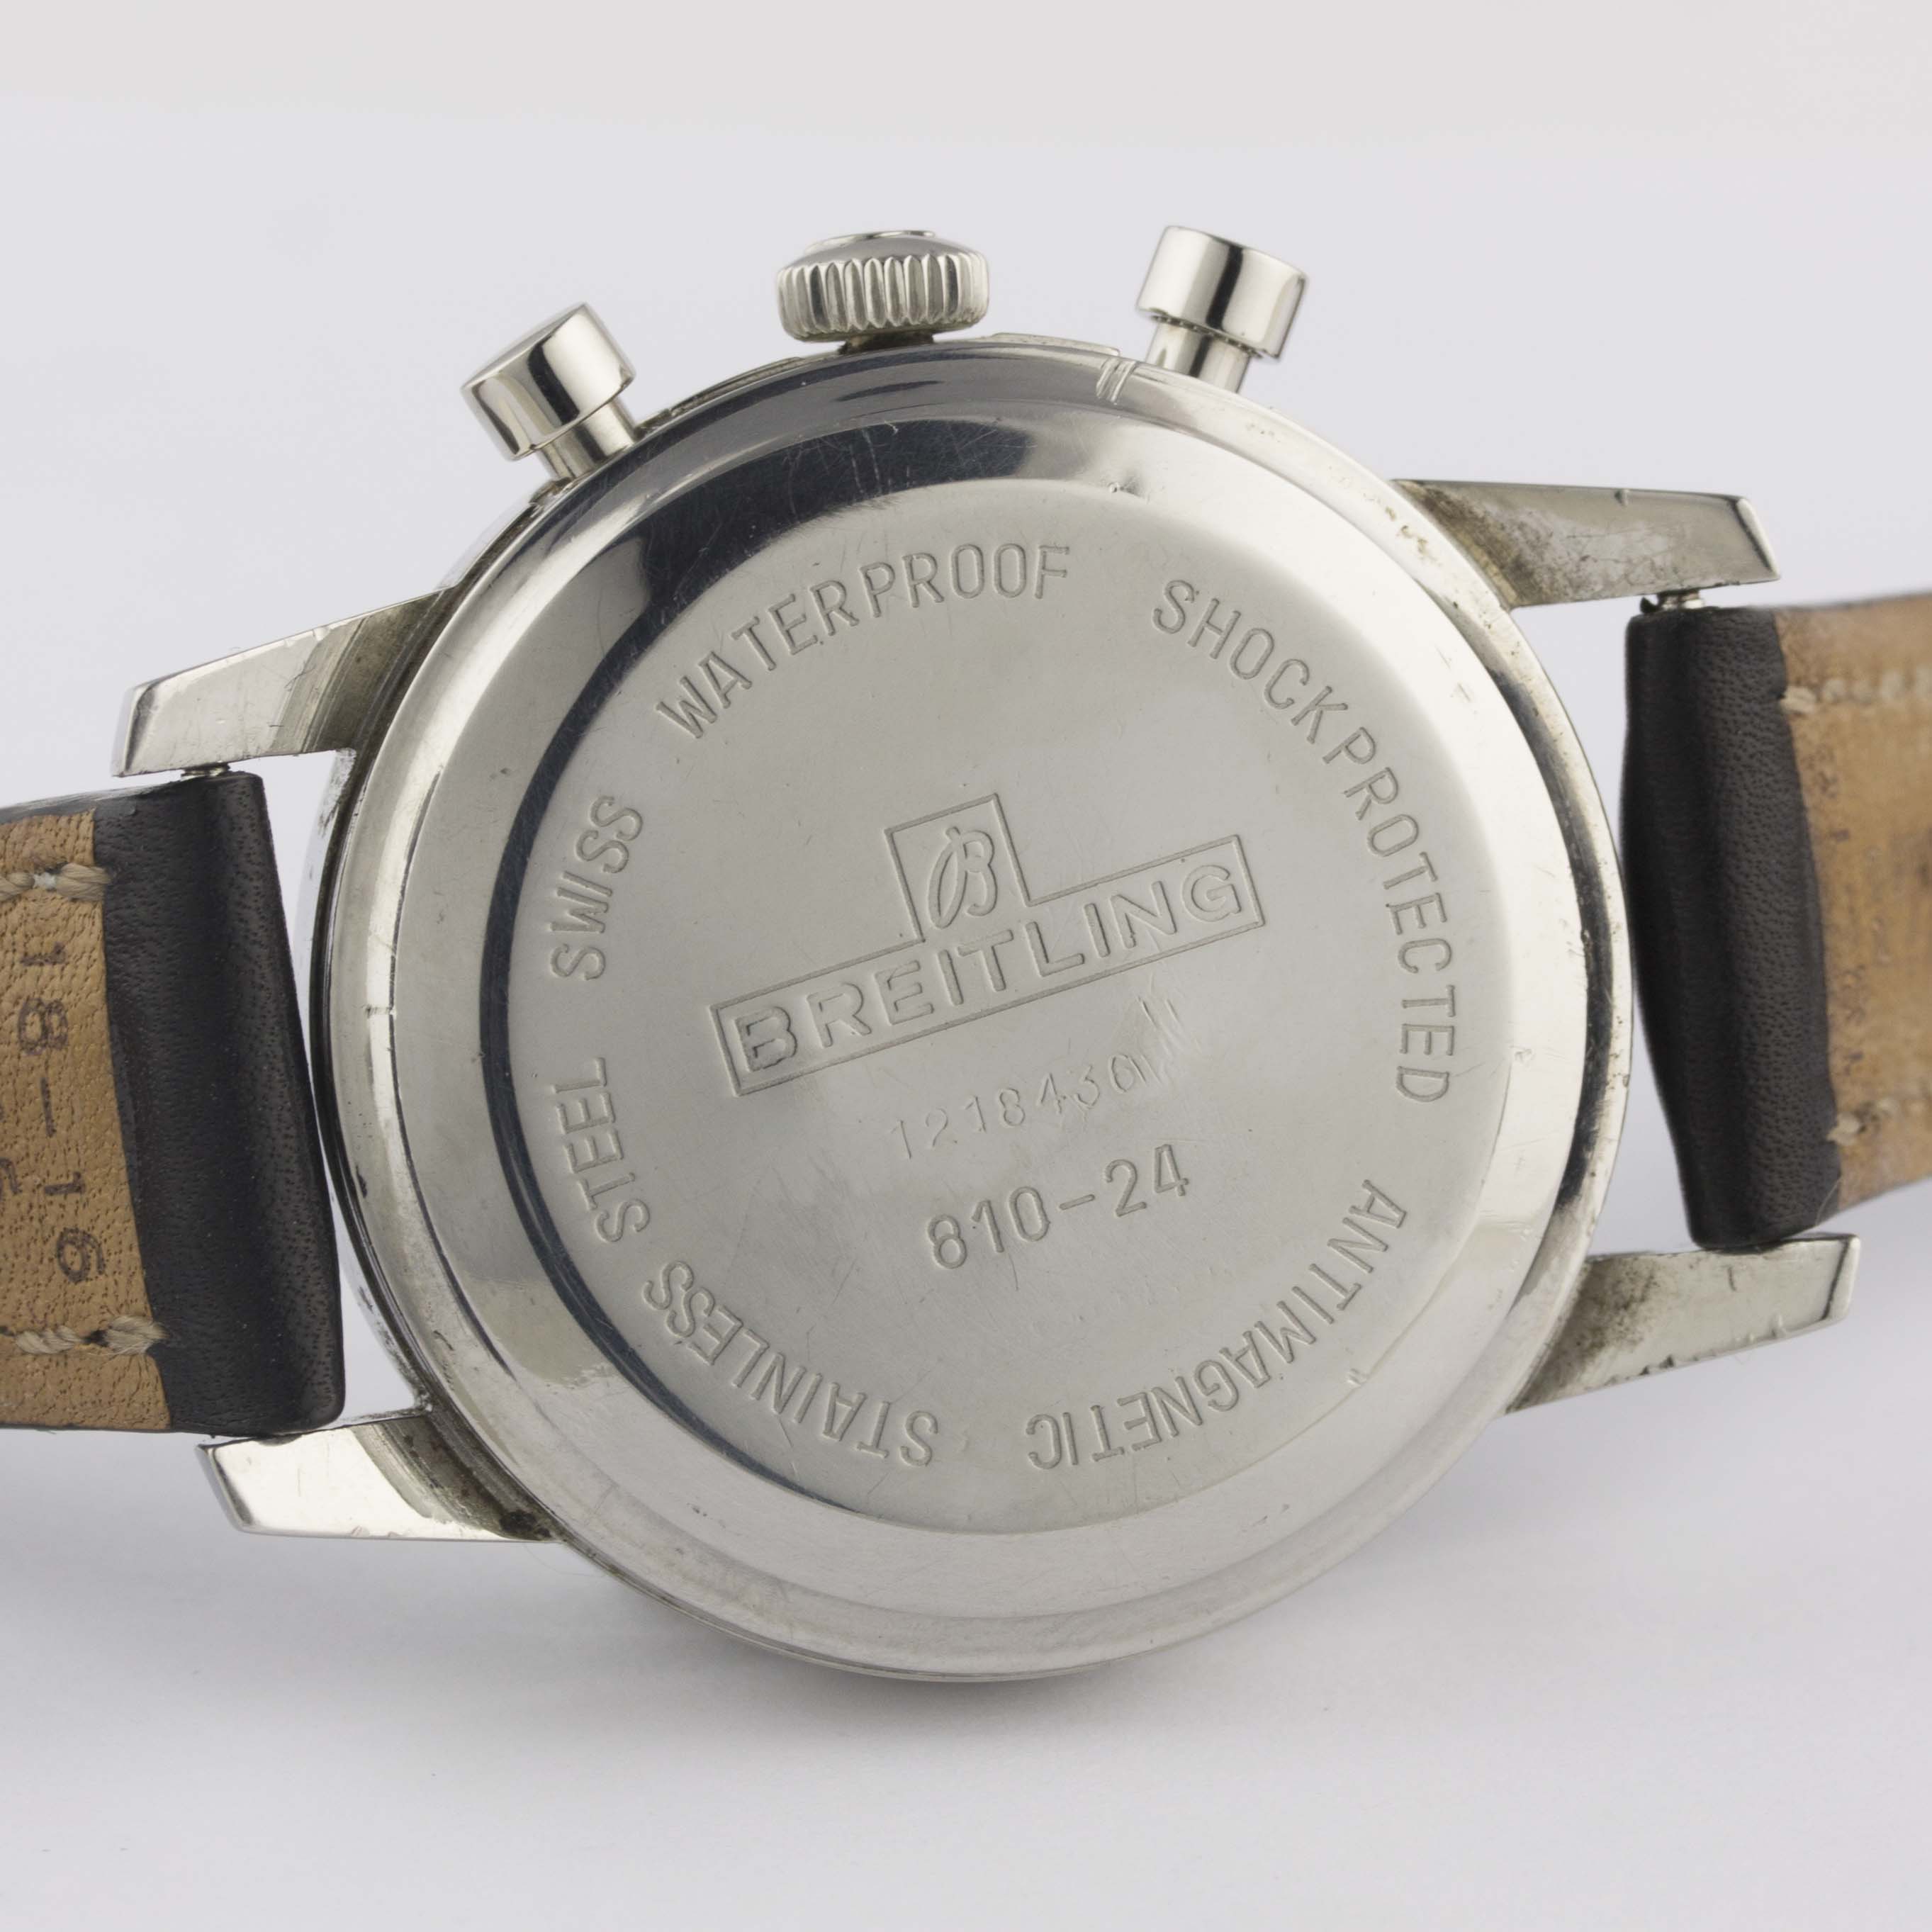 A RARE GENTLEMAN'S STAINLESS STEEL BREITLING TOP TIME 24 HOUR CHRONOGRAPH WRIST WATCH CIRCA 1968, - Image 8 of 12